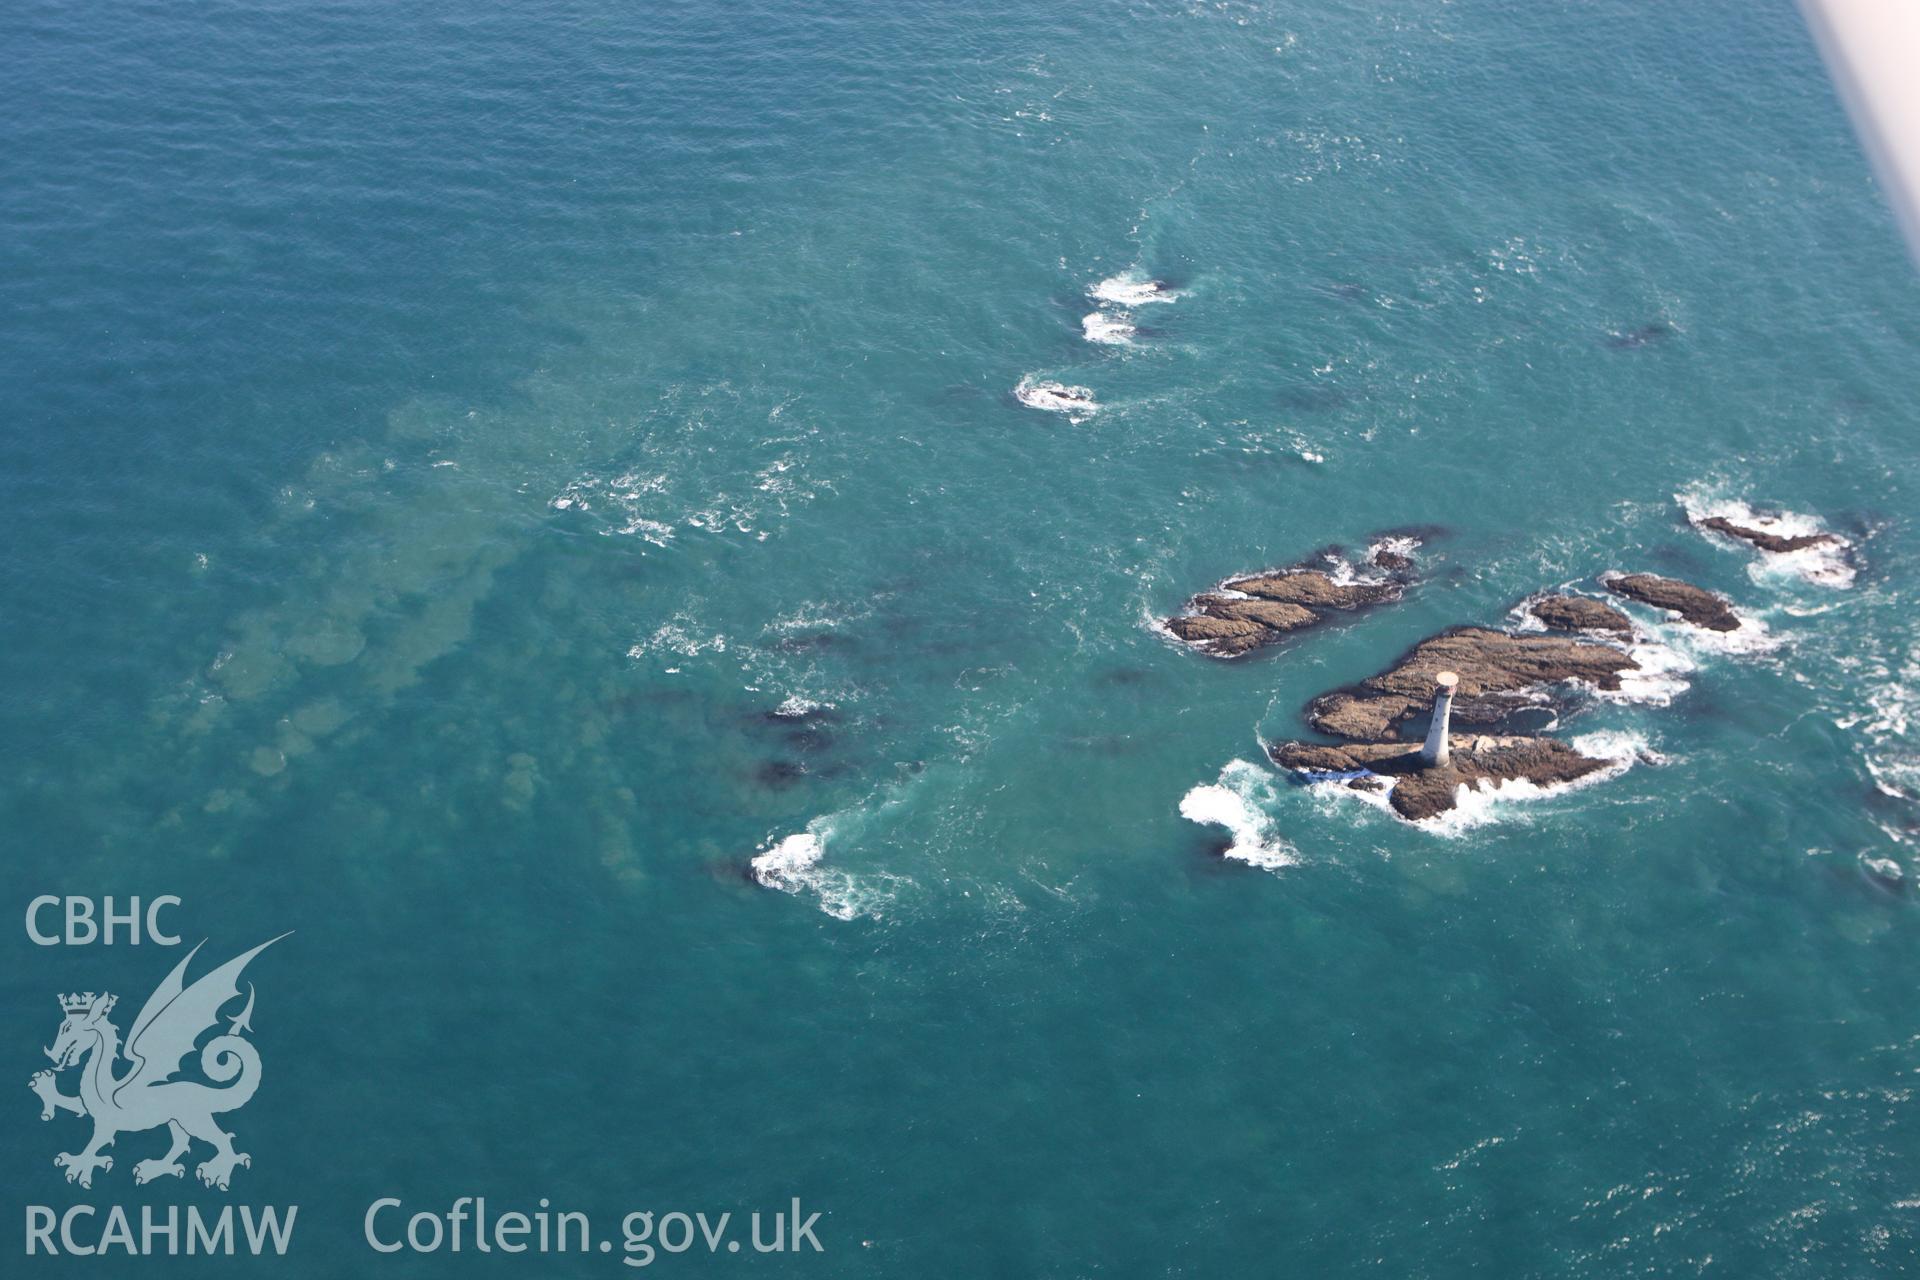 RCAHMW colour oblique photograph of The Smalls, west of Skomer Island. Taken by Toby Driver on 09/09/2010.